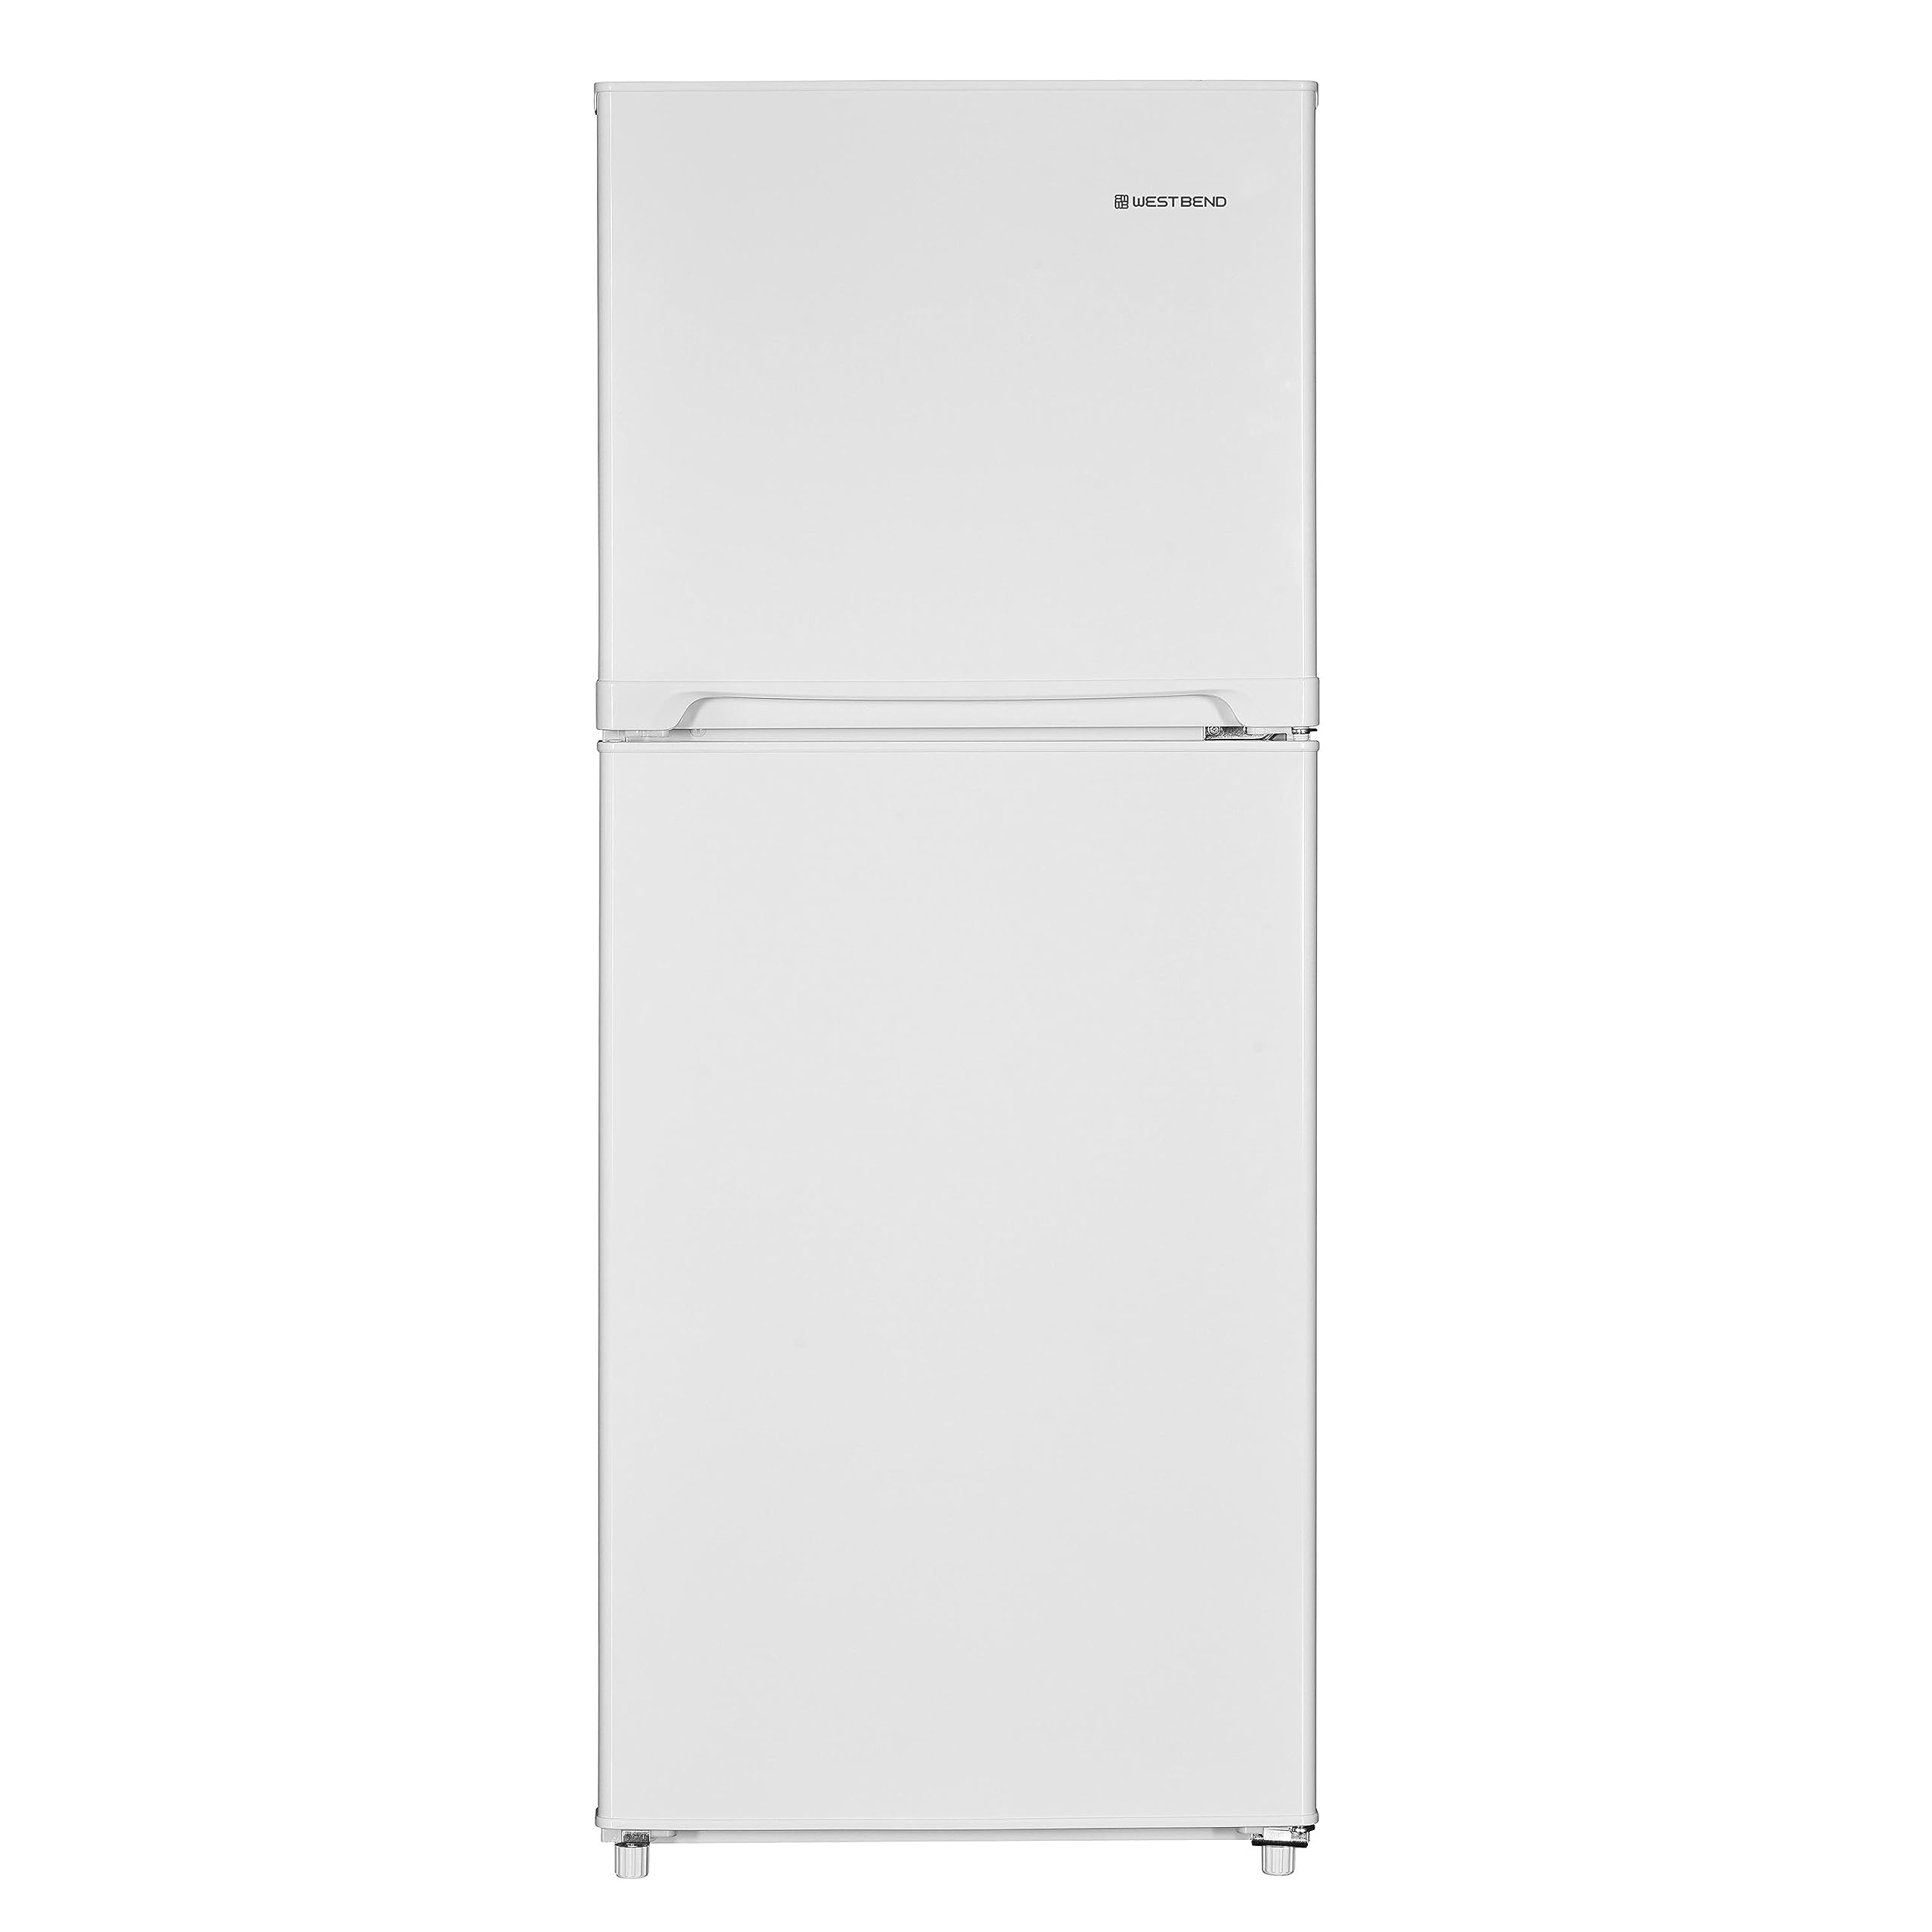 West Bend WB0100TMFBW Frost Free Apartment Size Refrigerator, 10.1-Cu.Ft, White